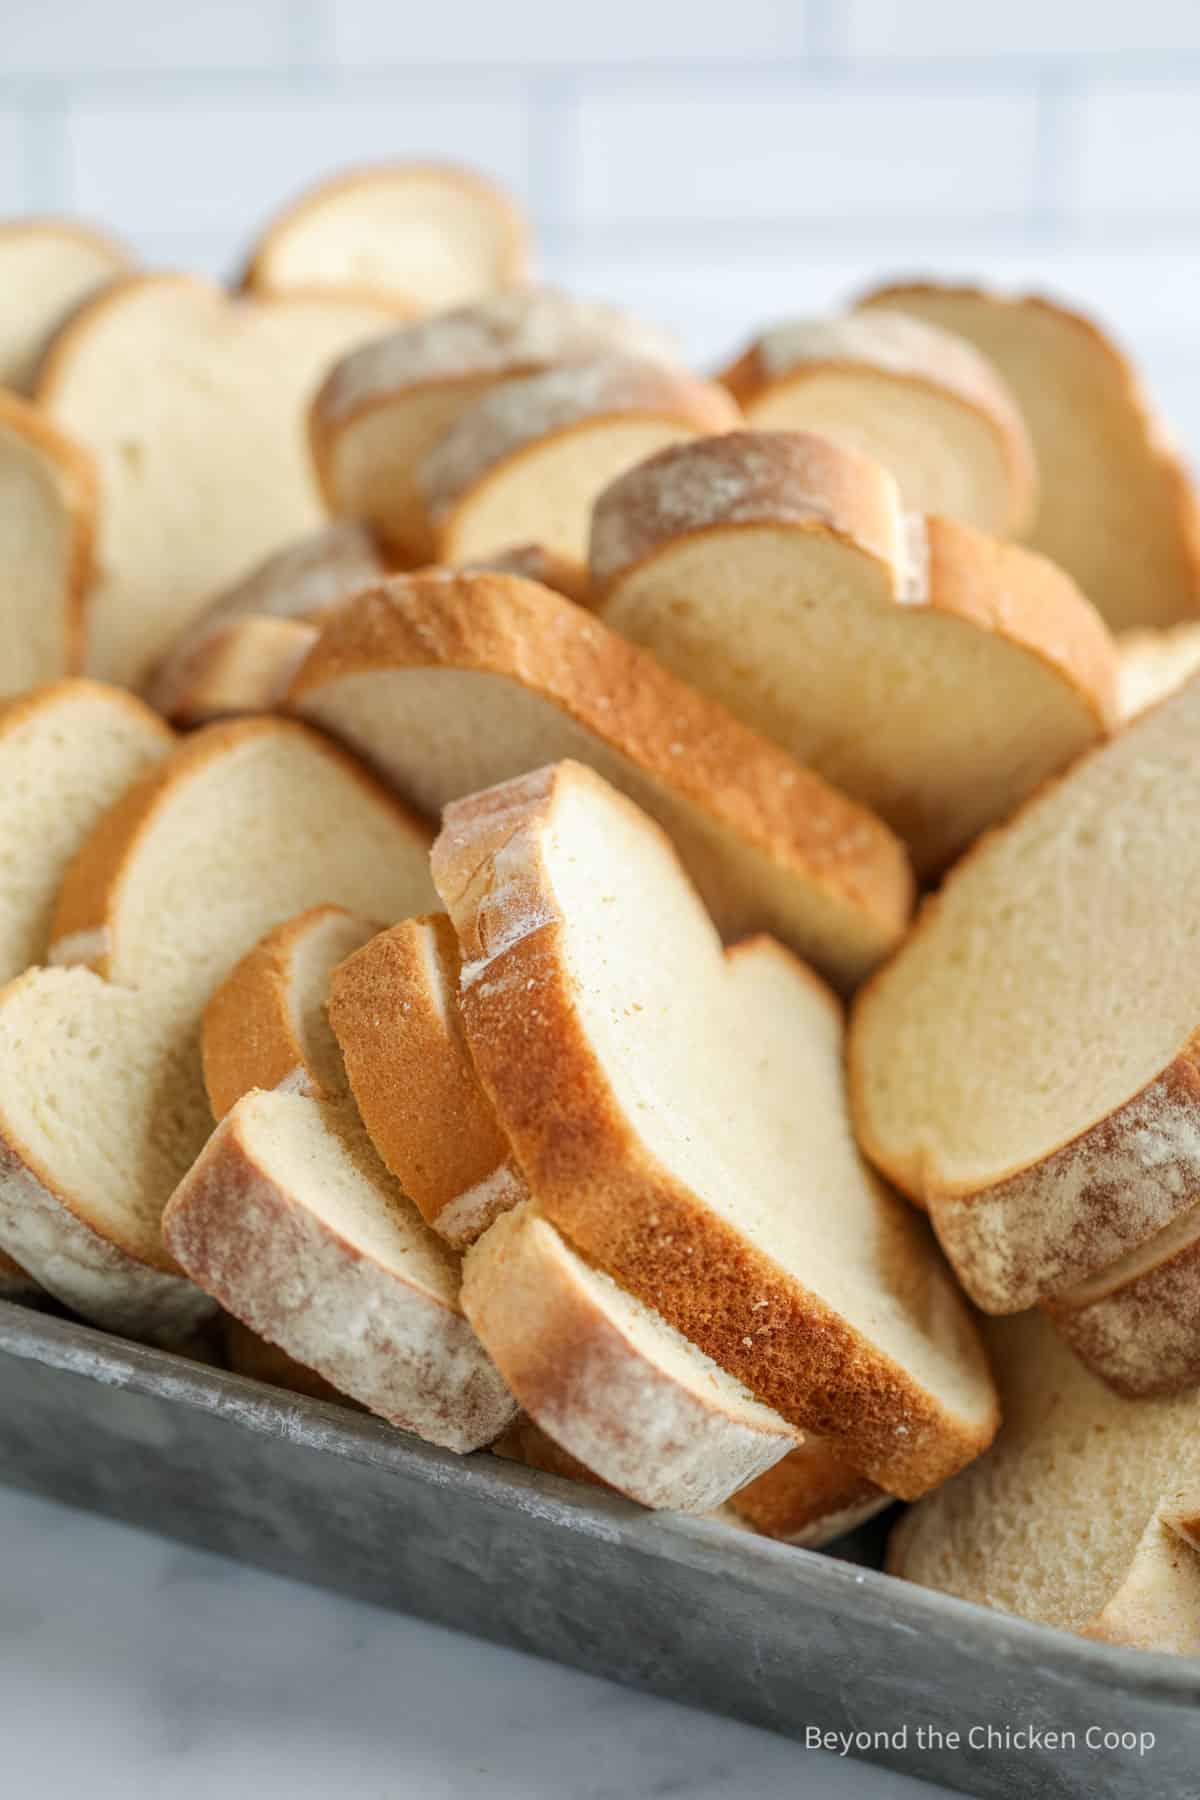 Slices of white bread in a pan.